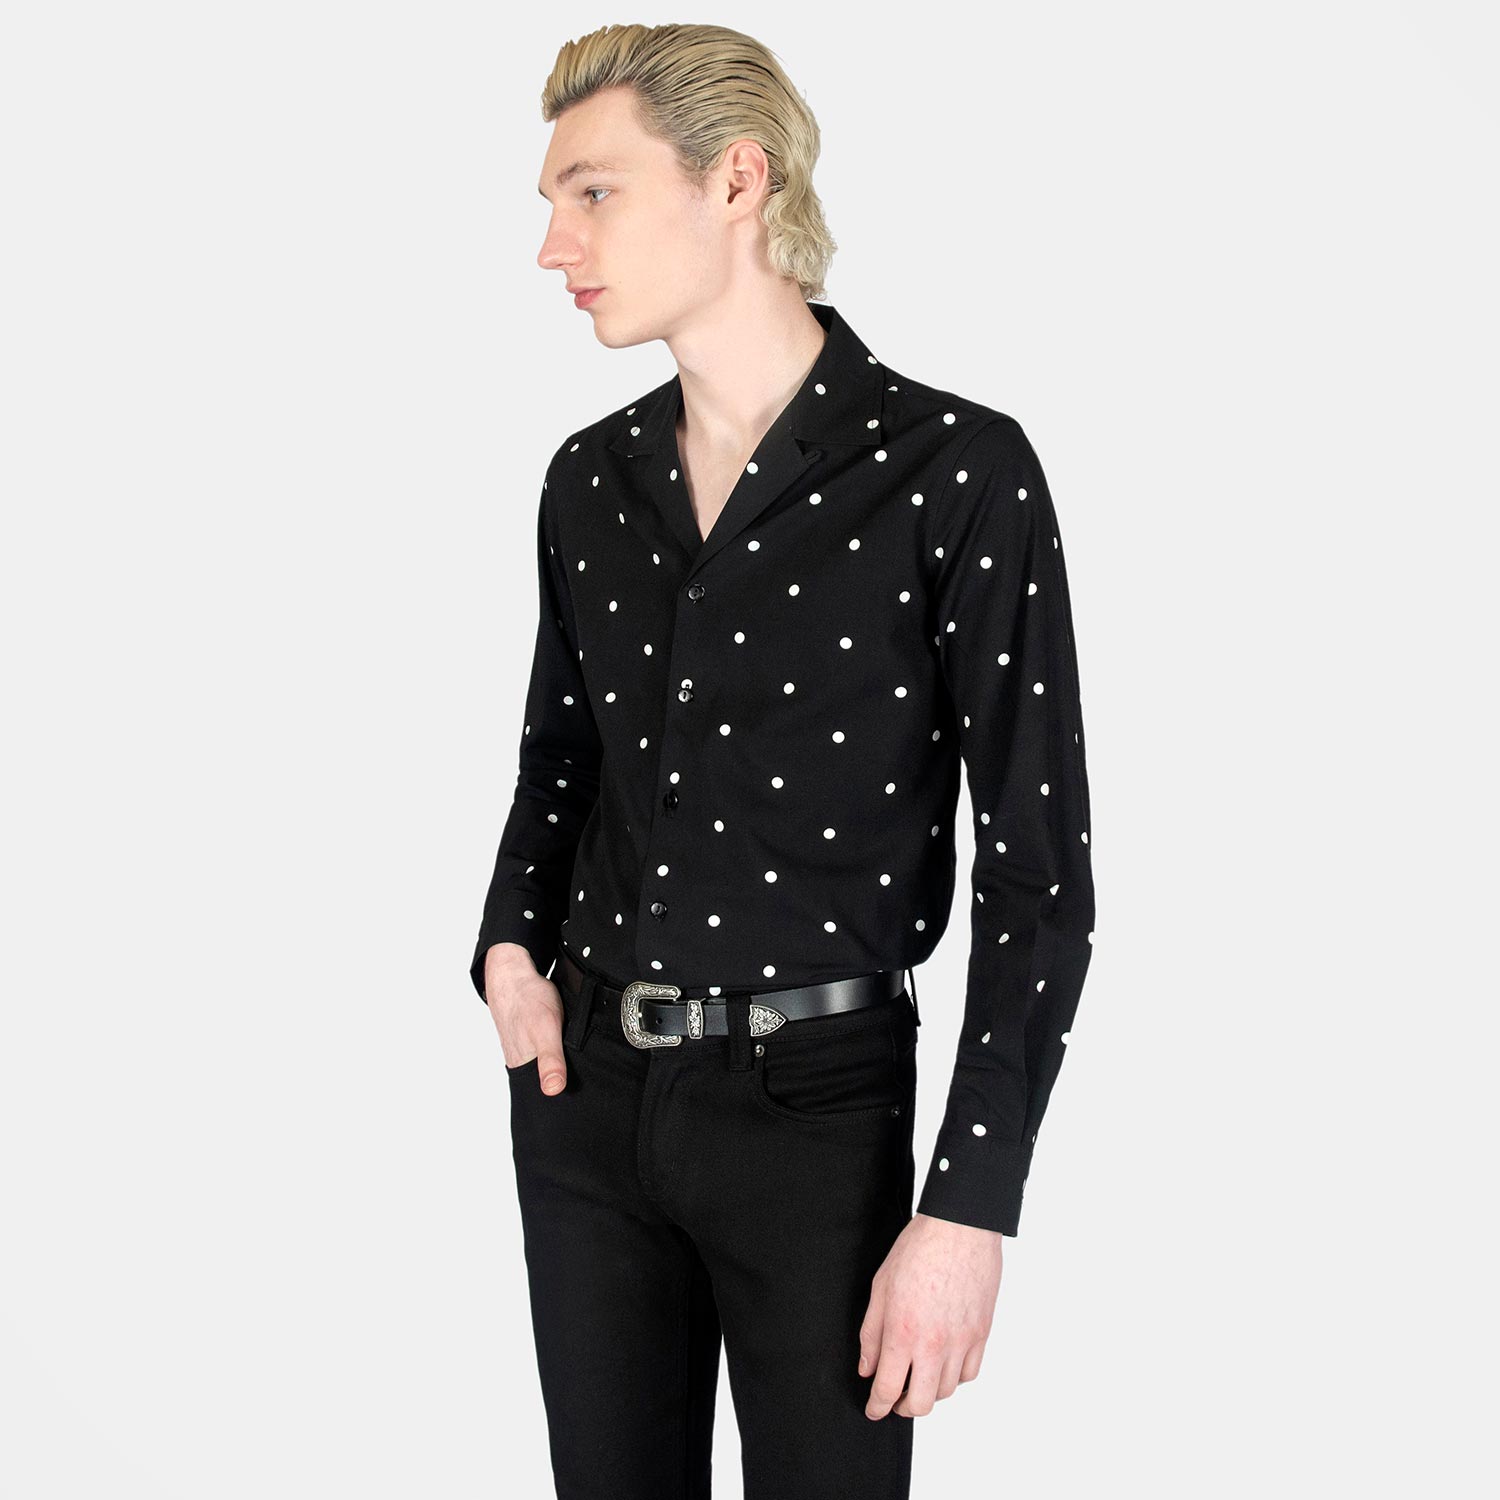 Stepping Stone - Black and White Polka Dot Shirt - Men's by Straight to Hell